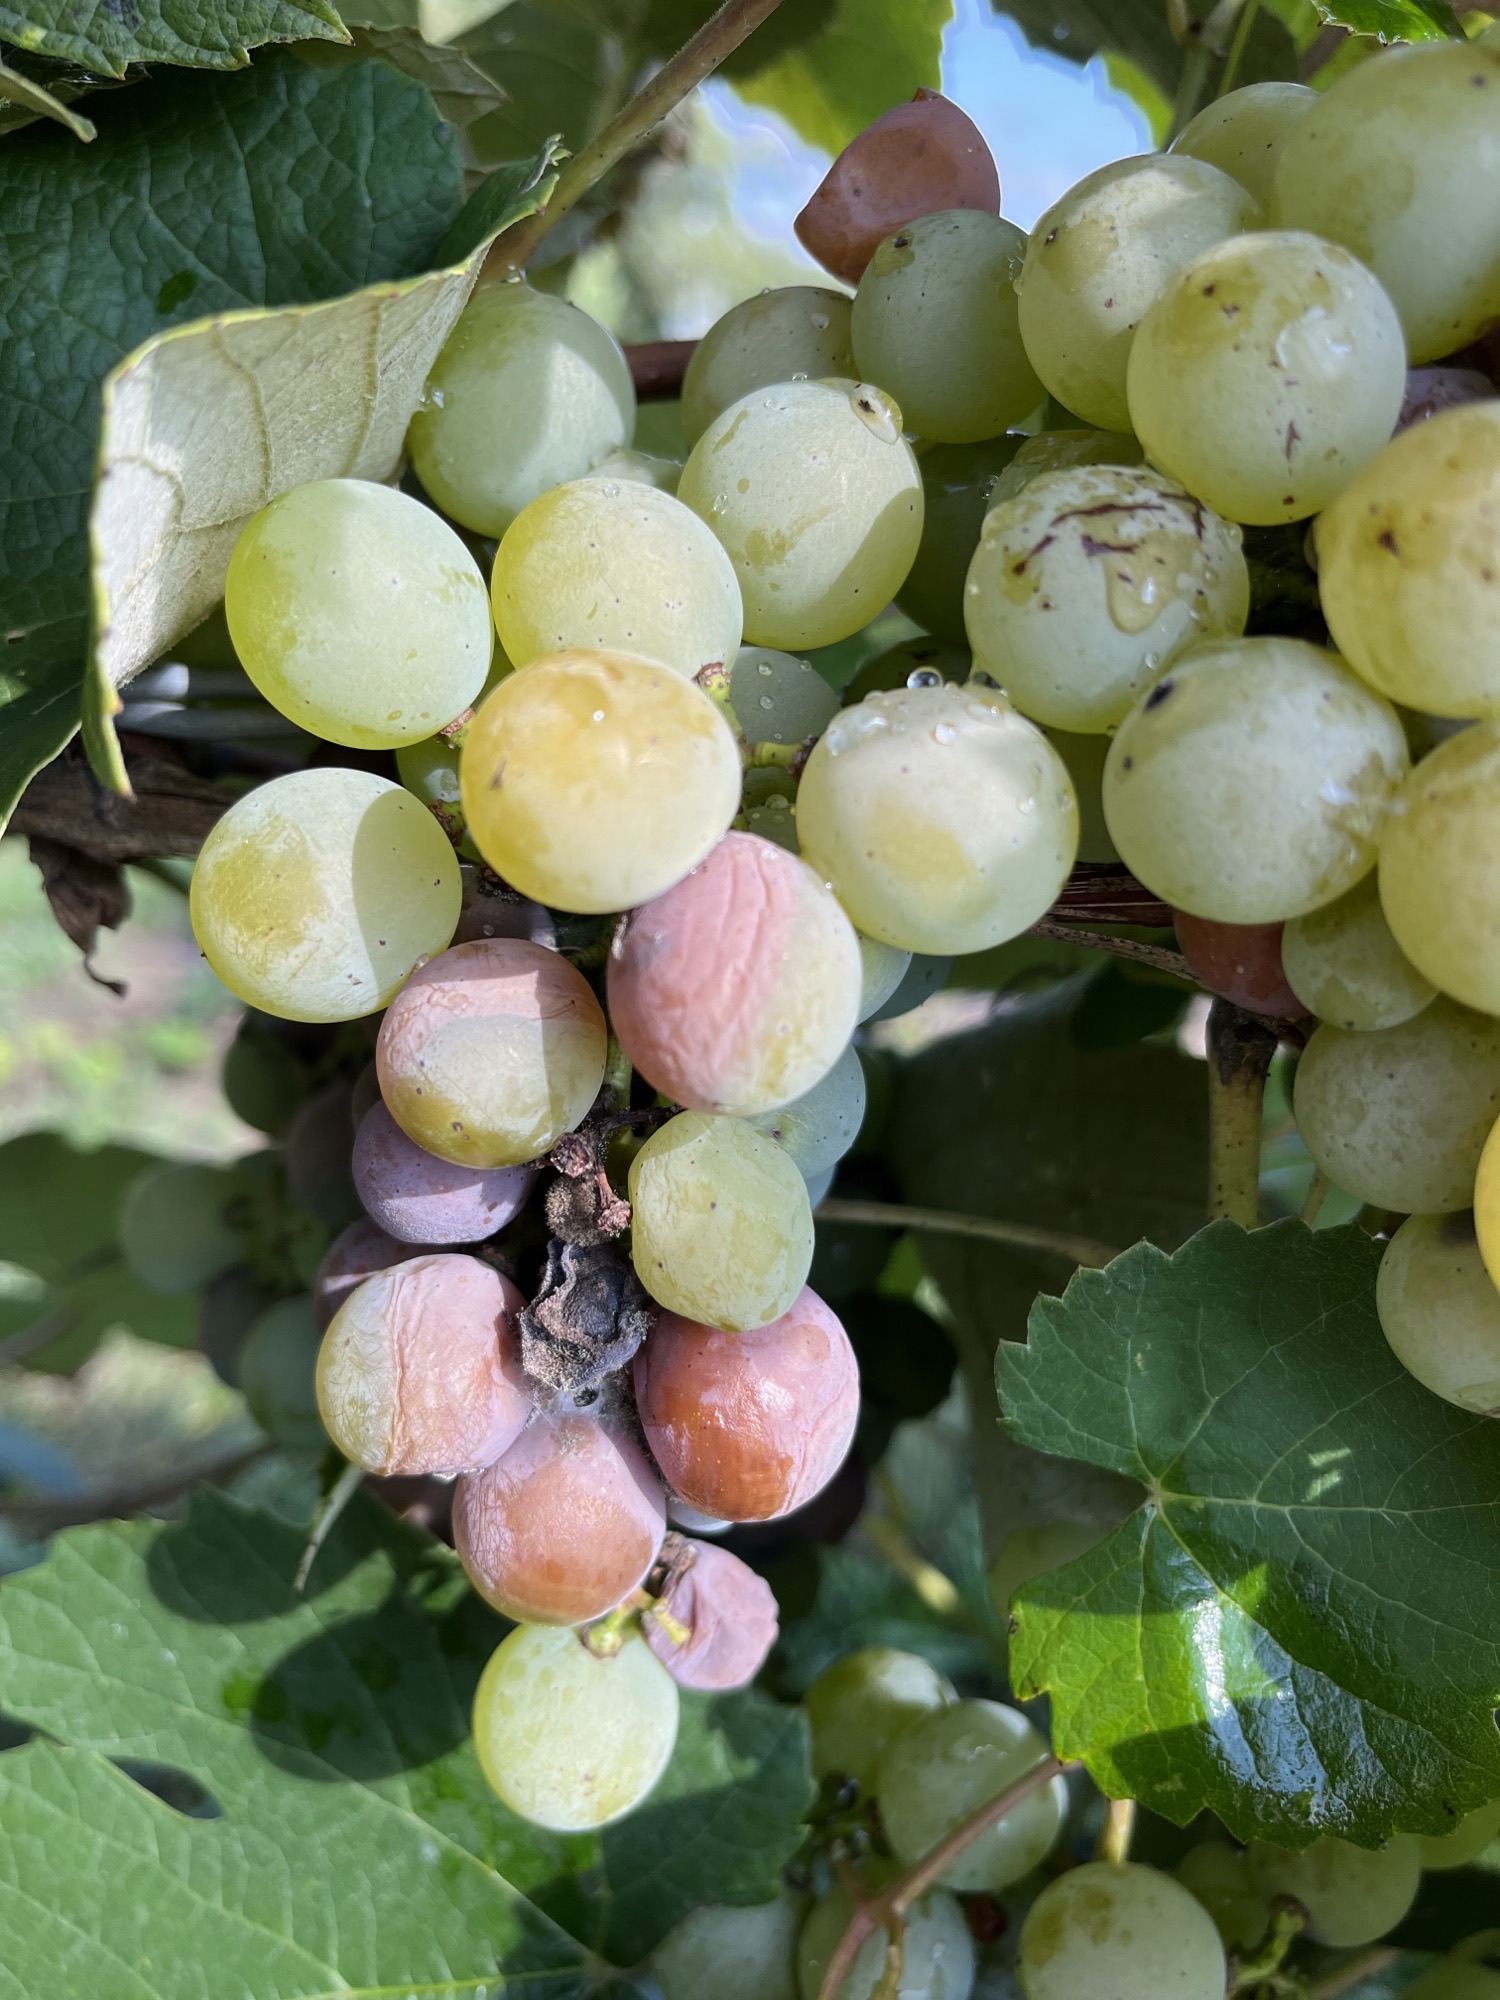 Photo 3. Botrytis bunch rot on grape clusters.